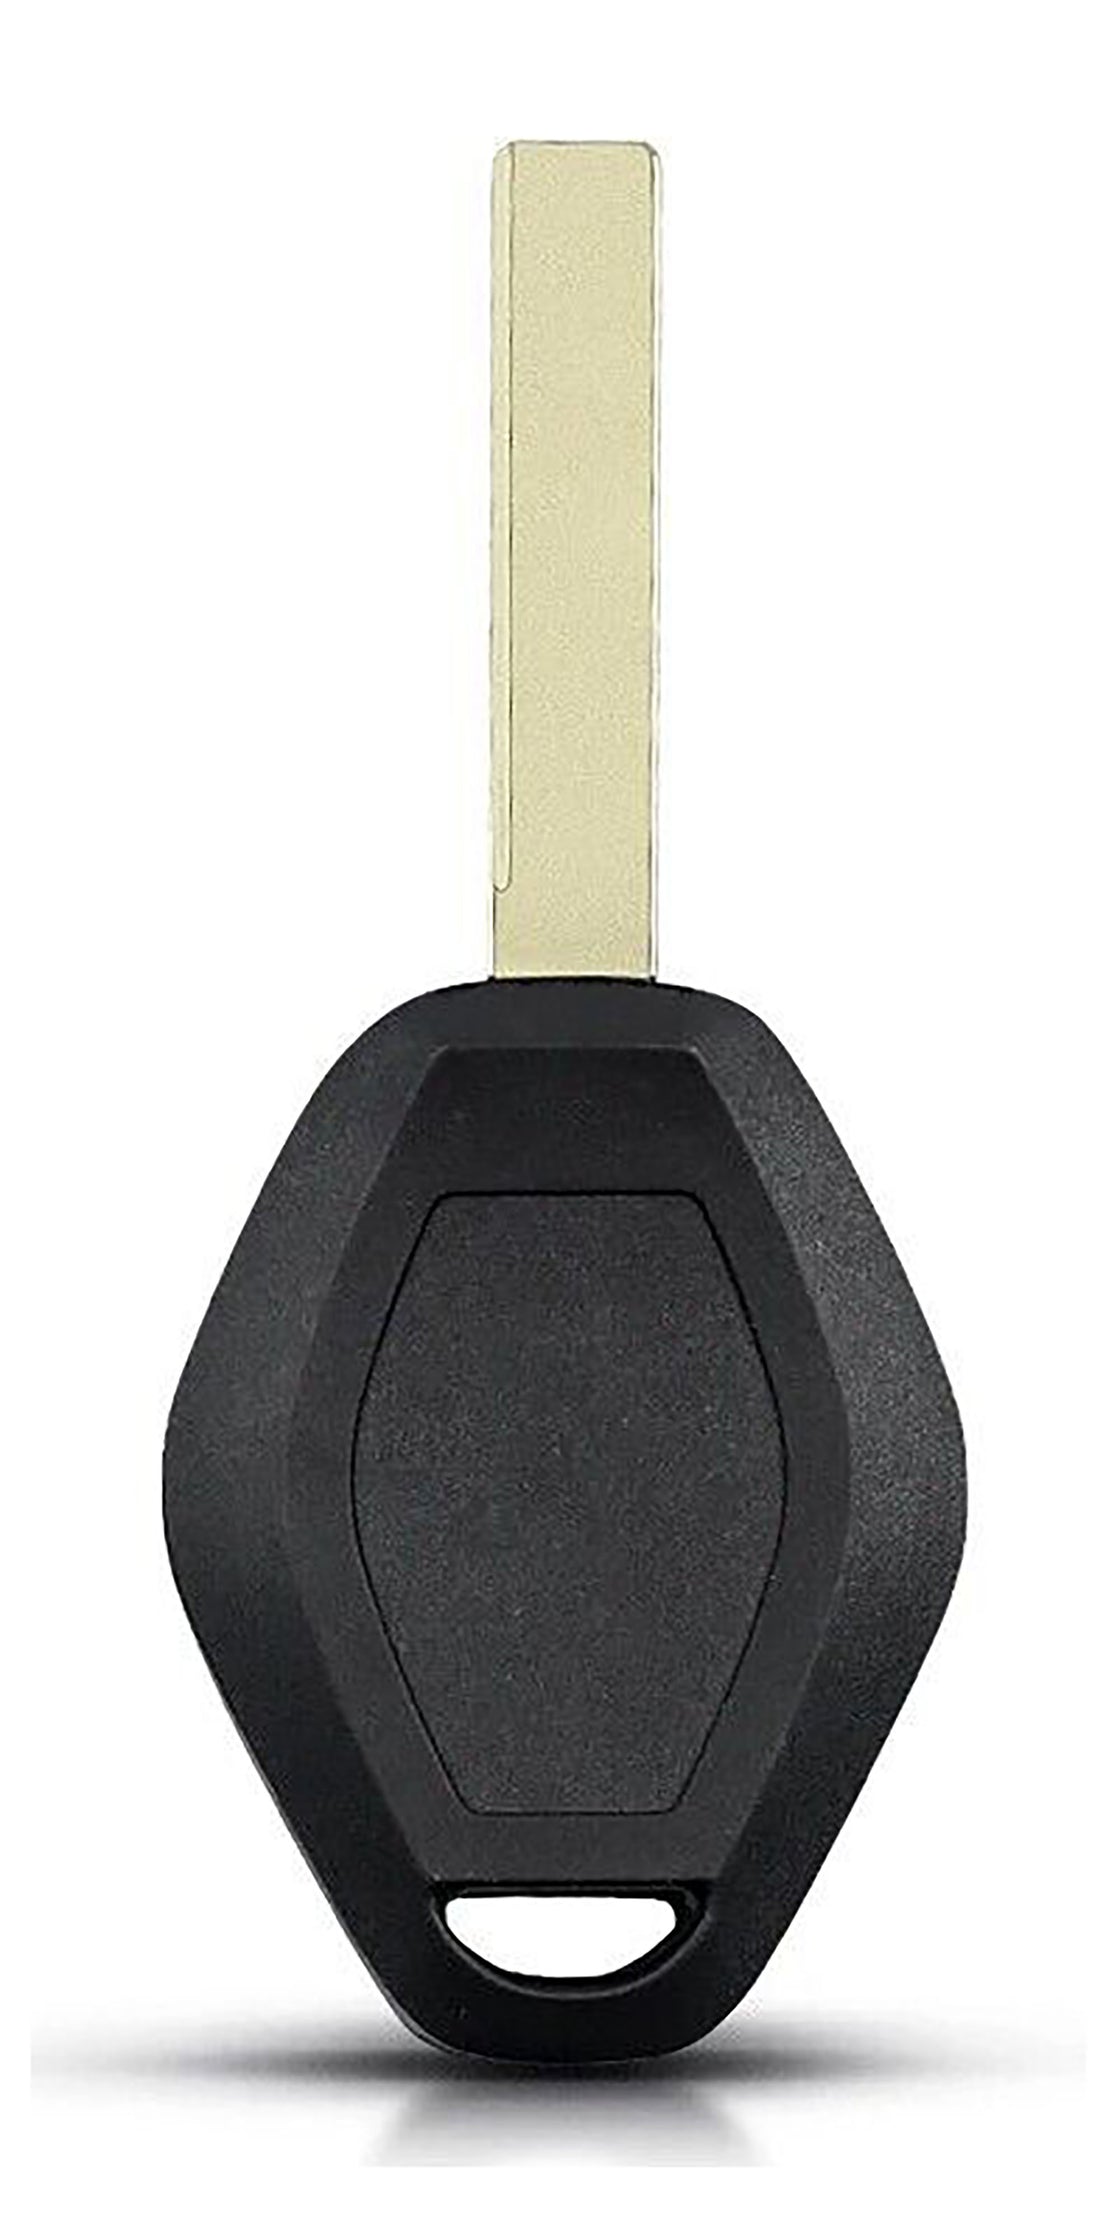 1x New Replacement Key Fob Remote Compatible with & Fit For 2005 2006 2007 BMW 3 SERIES. CAS2 Chip 46 - MPN LX8FZV-CAS2-02